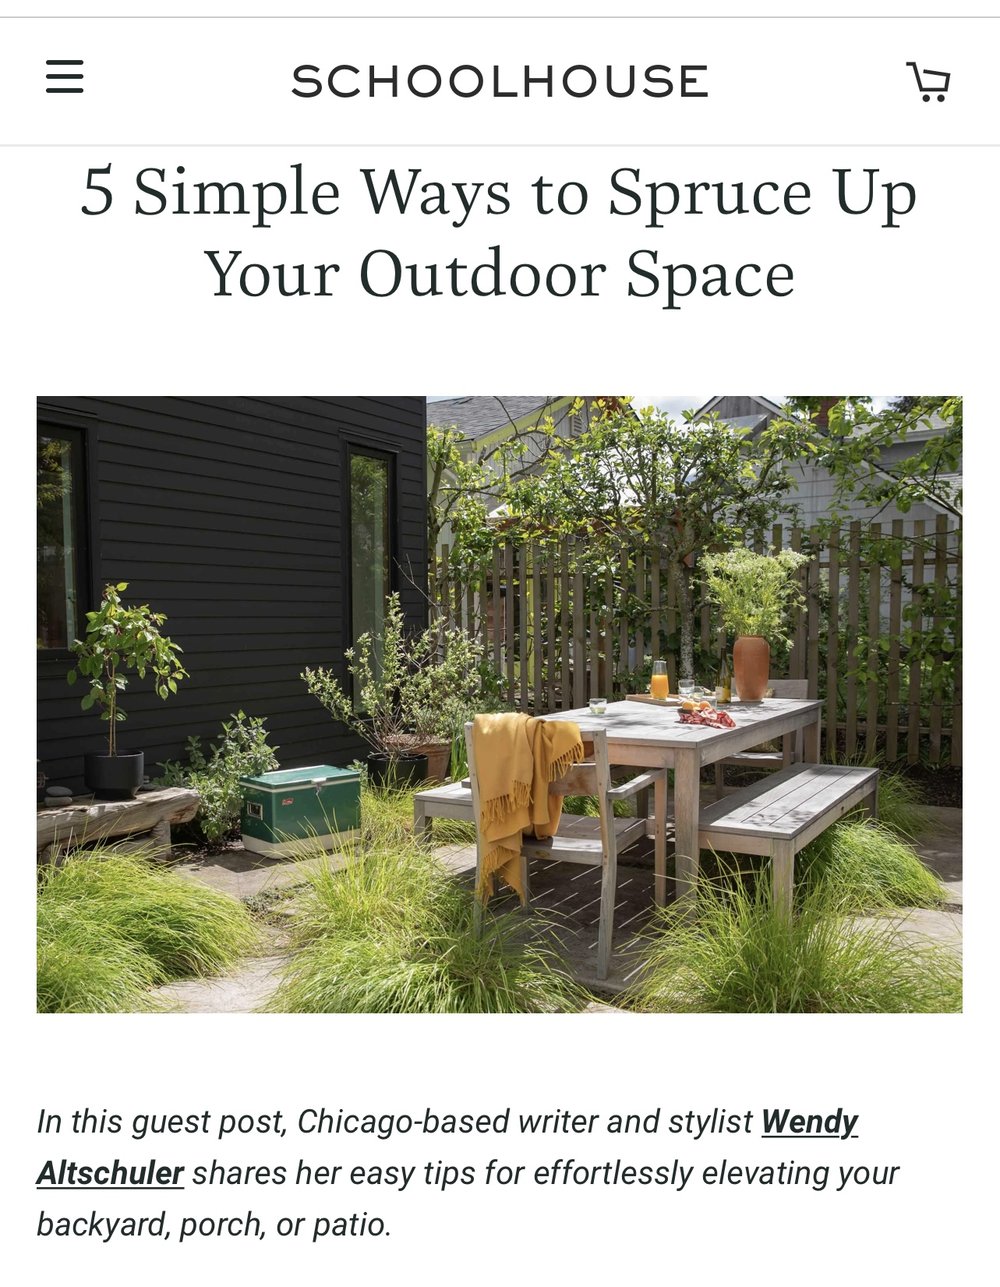 5 Simple Ways to Spruce Up Your Outdoor Space